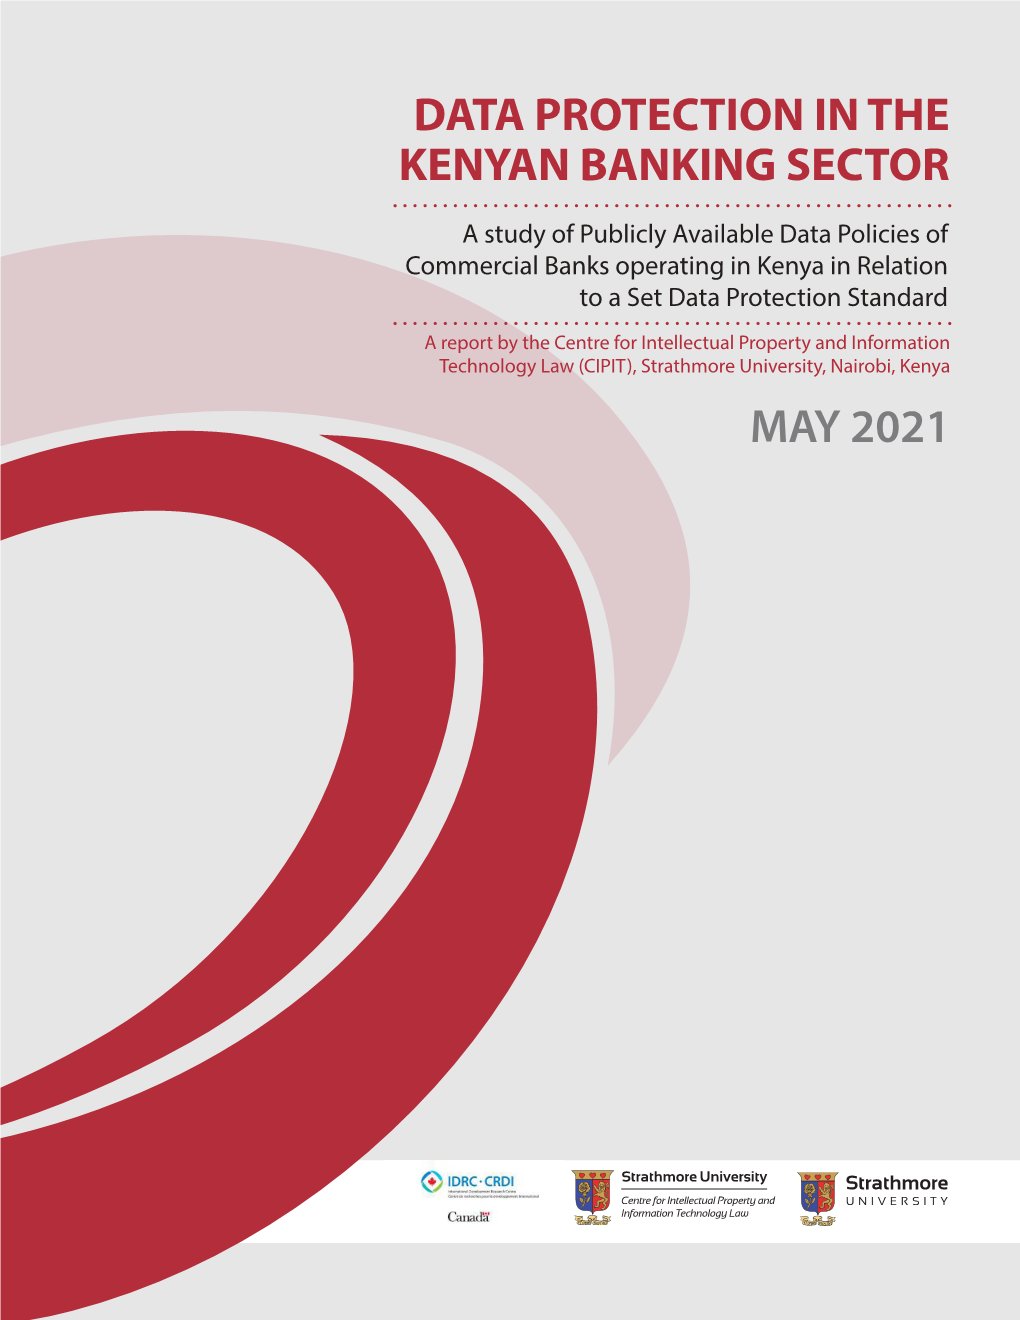 Data Protection in the Kenyan Banking Sector May 2021